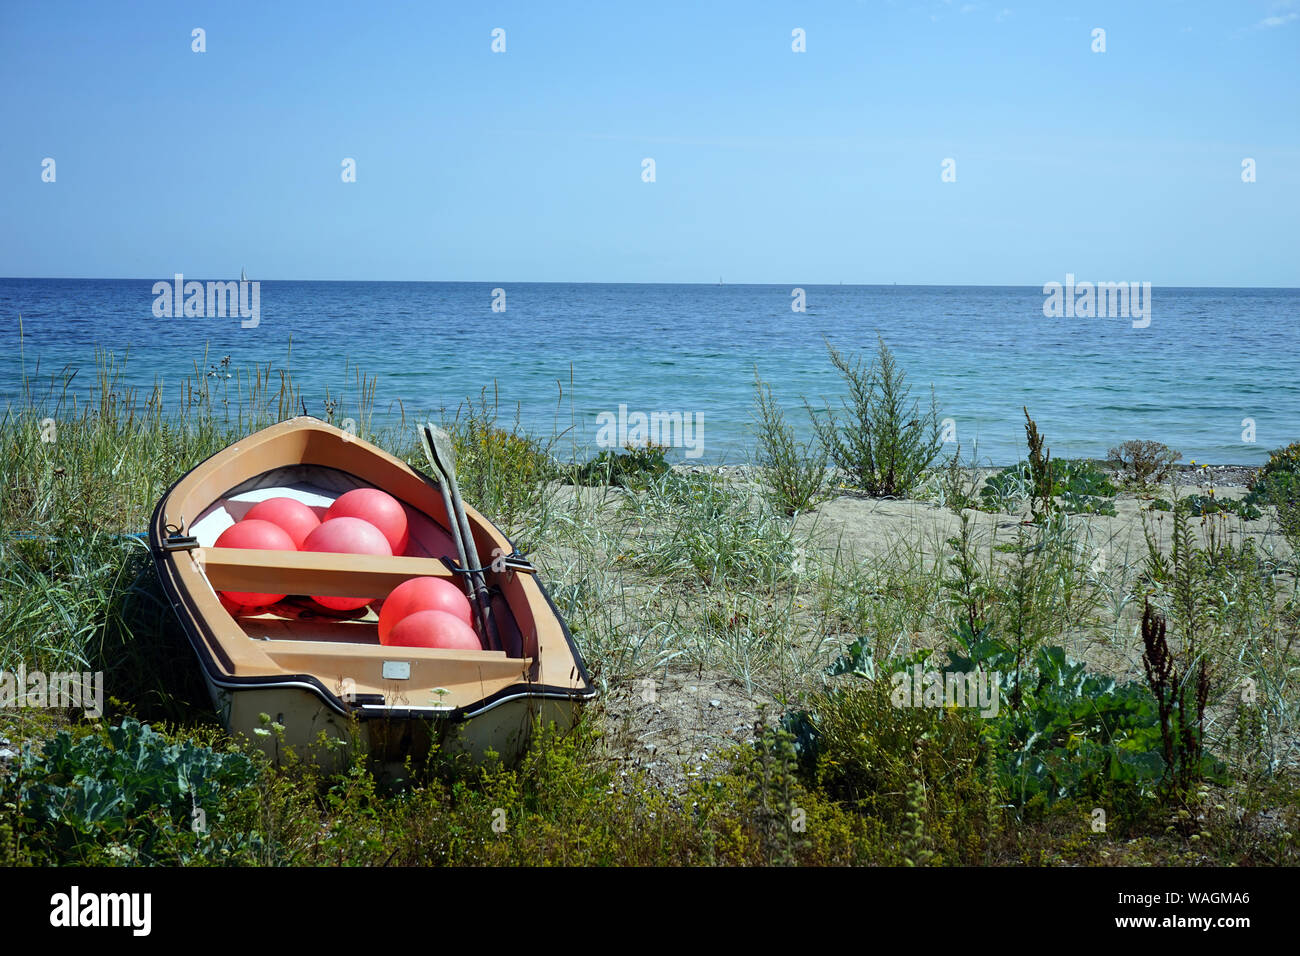 Red balls in wooden boat on the coast Stock Photo